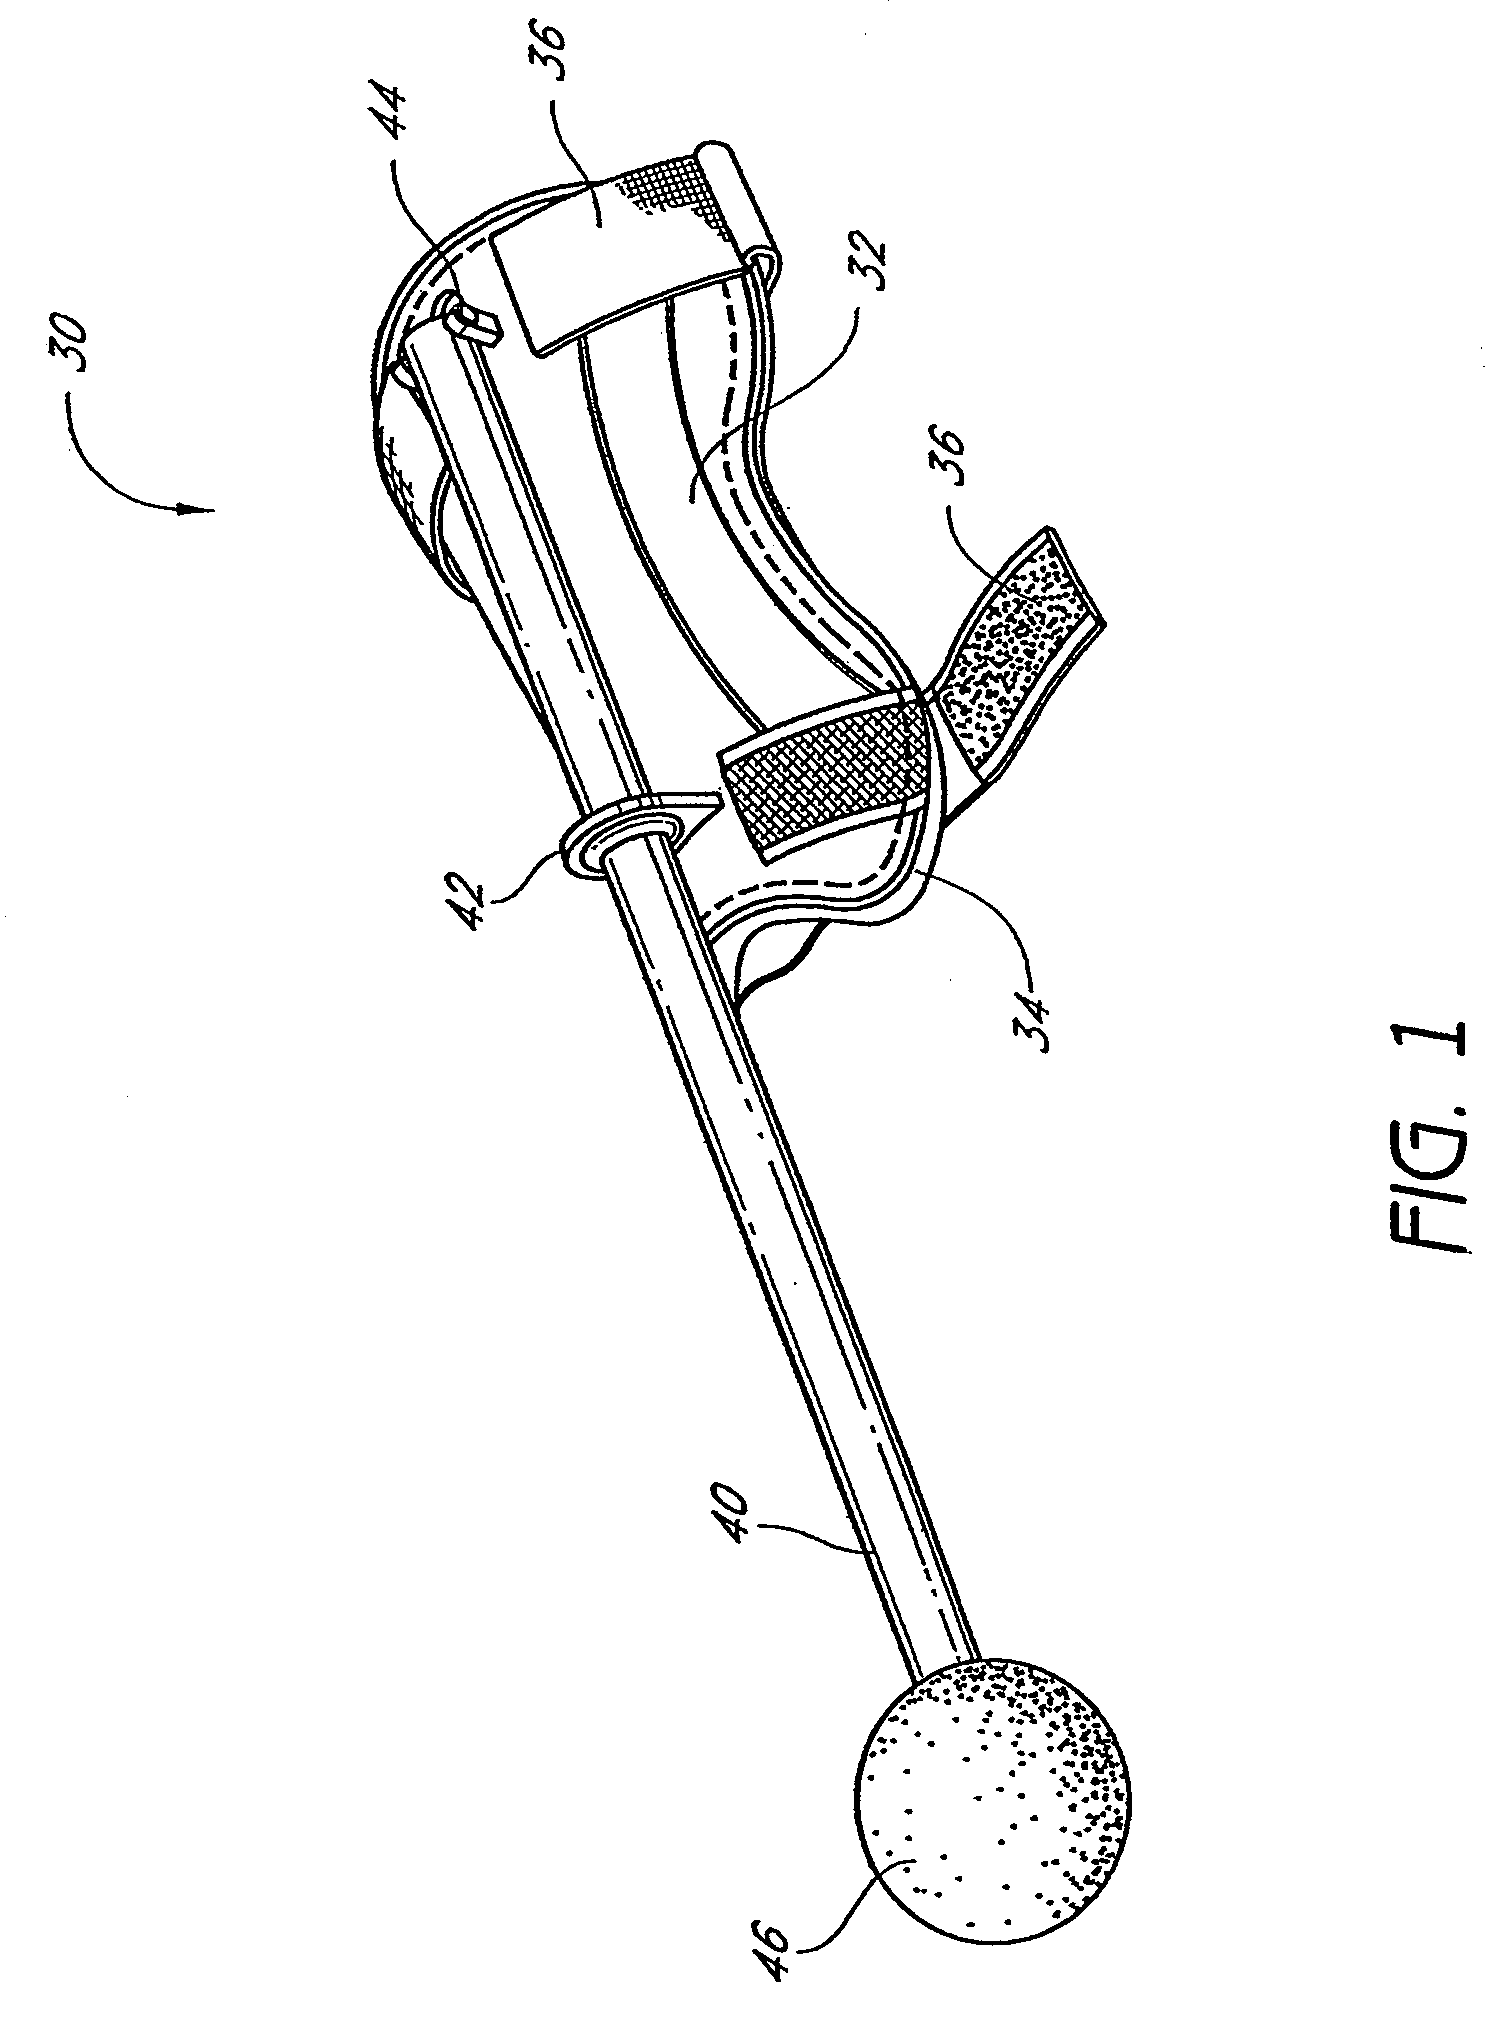 Method of enhancing participant's performance in a sporting activity